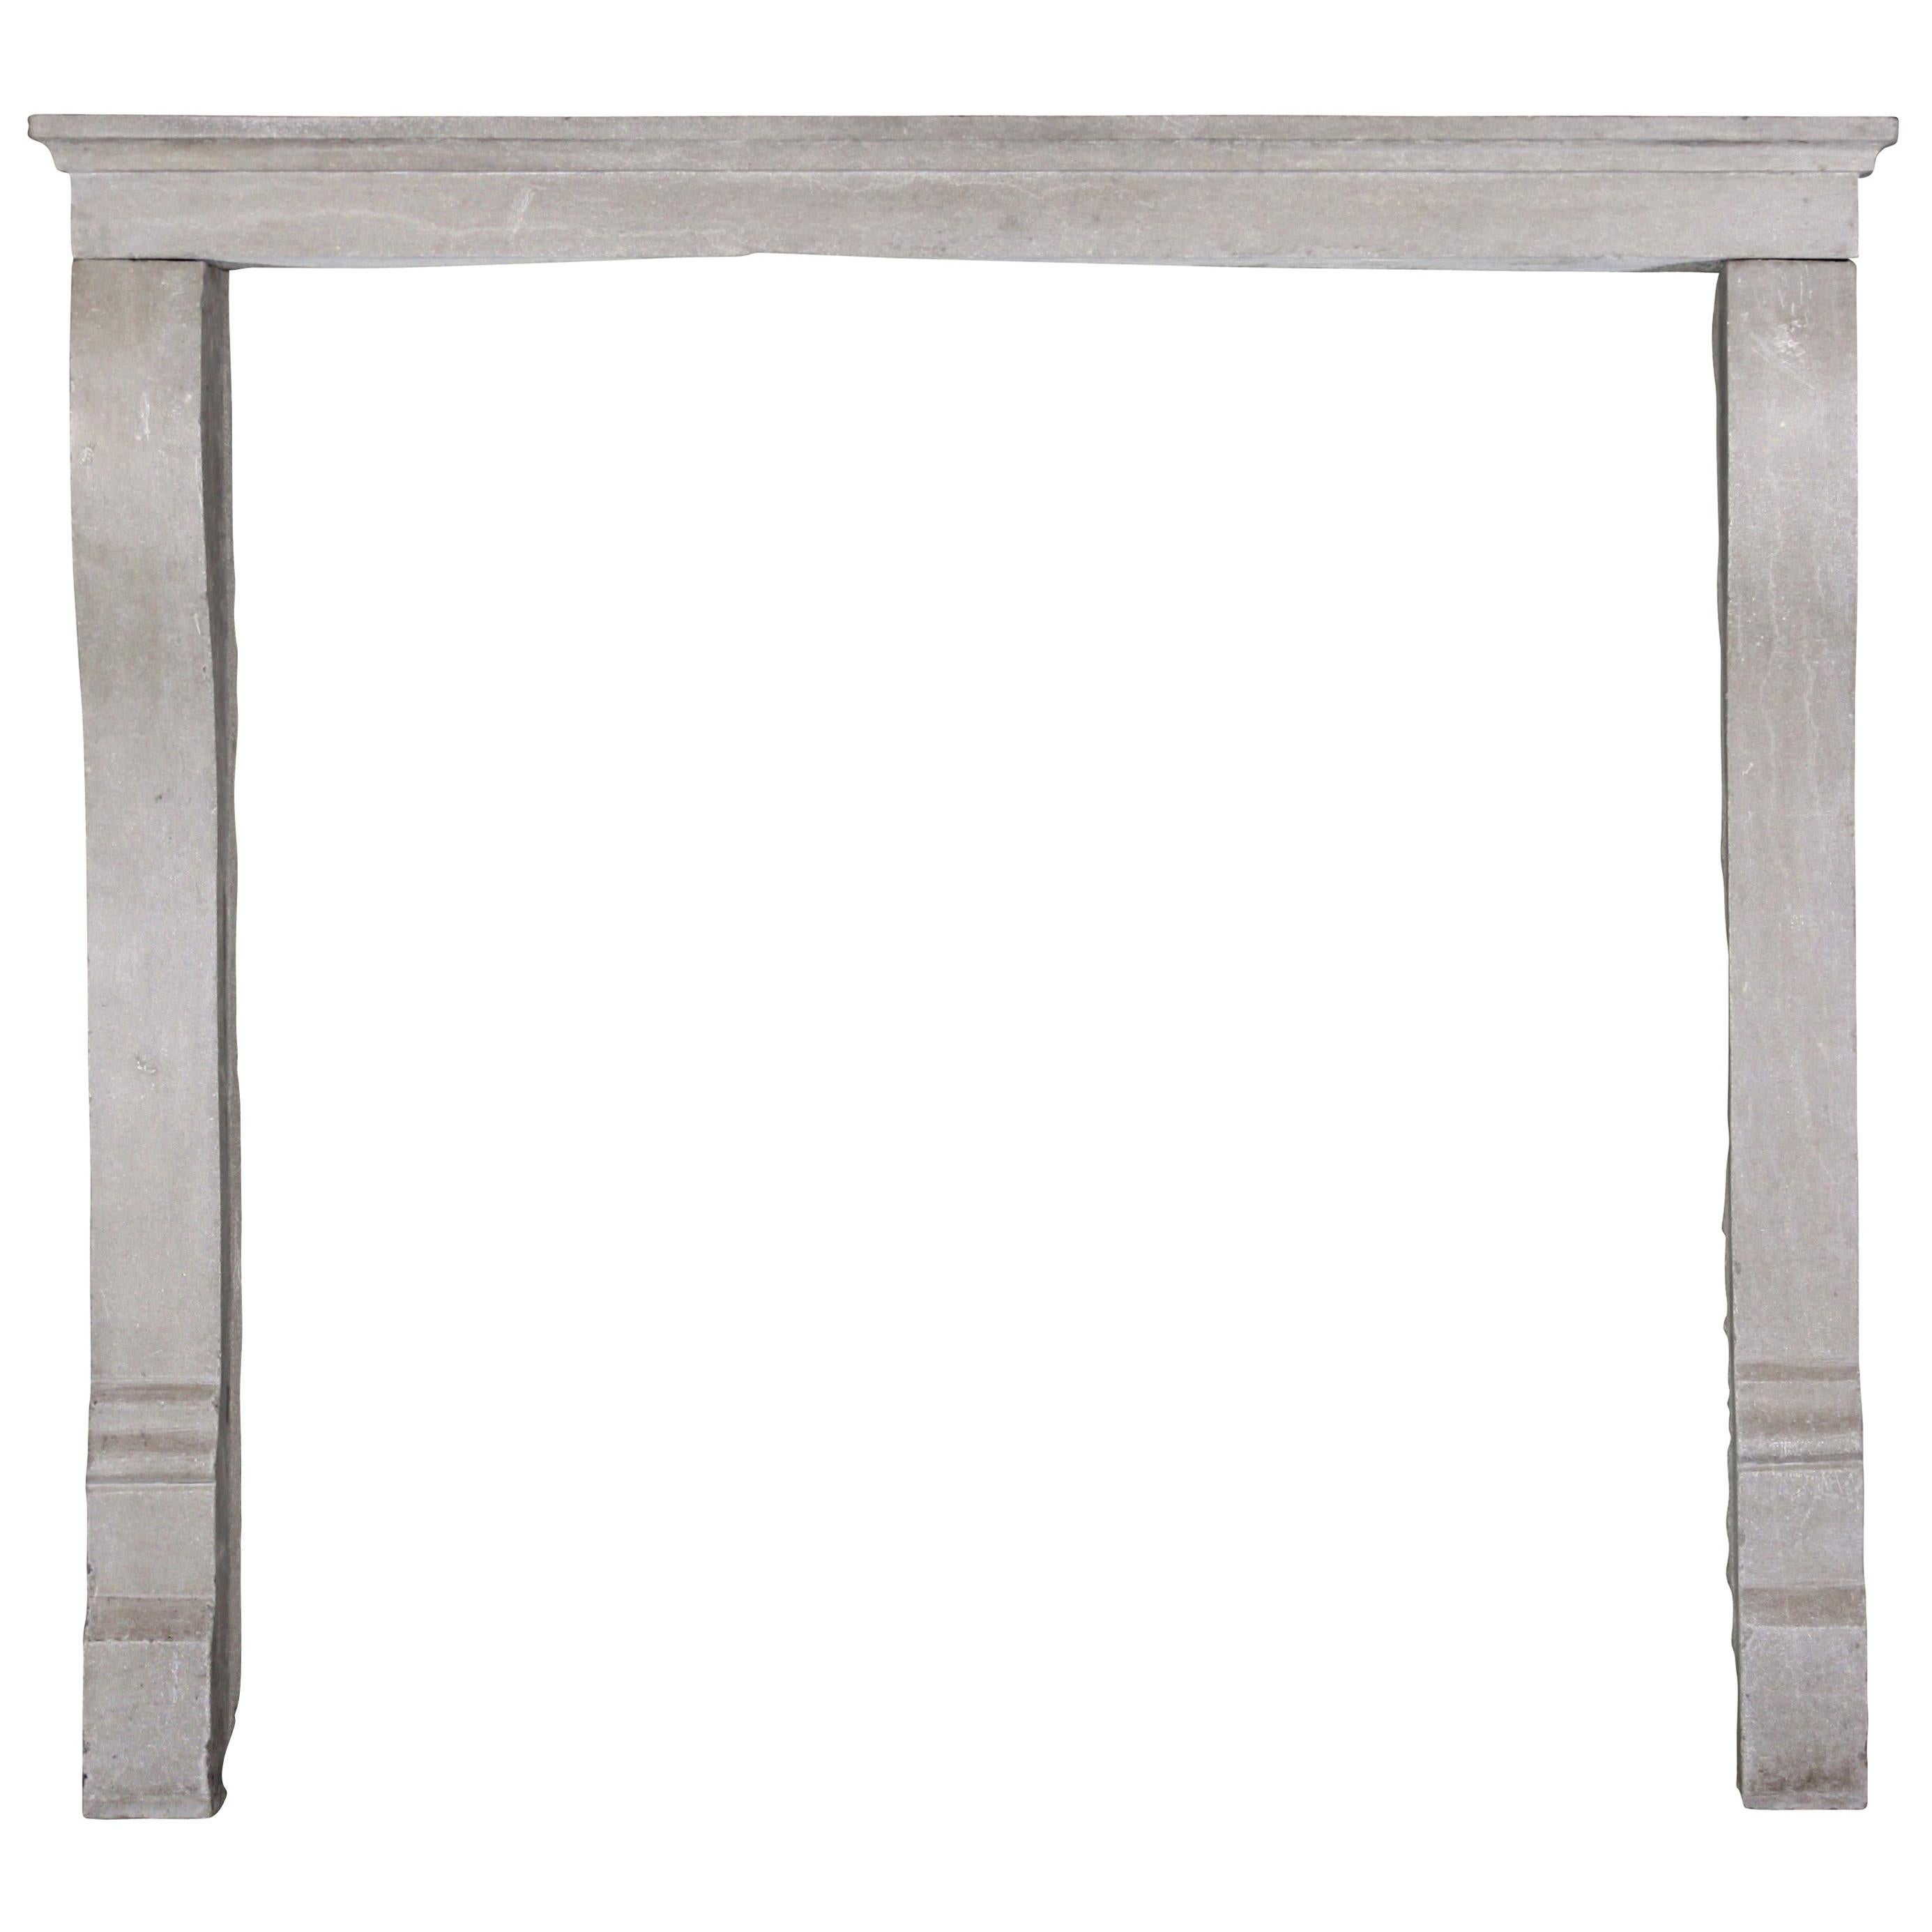 Fine Small French Antique Fireplace Surround in Beige Buxy Limestone